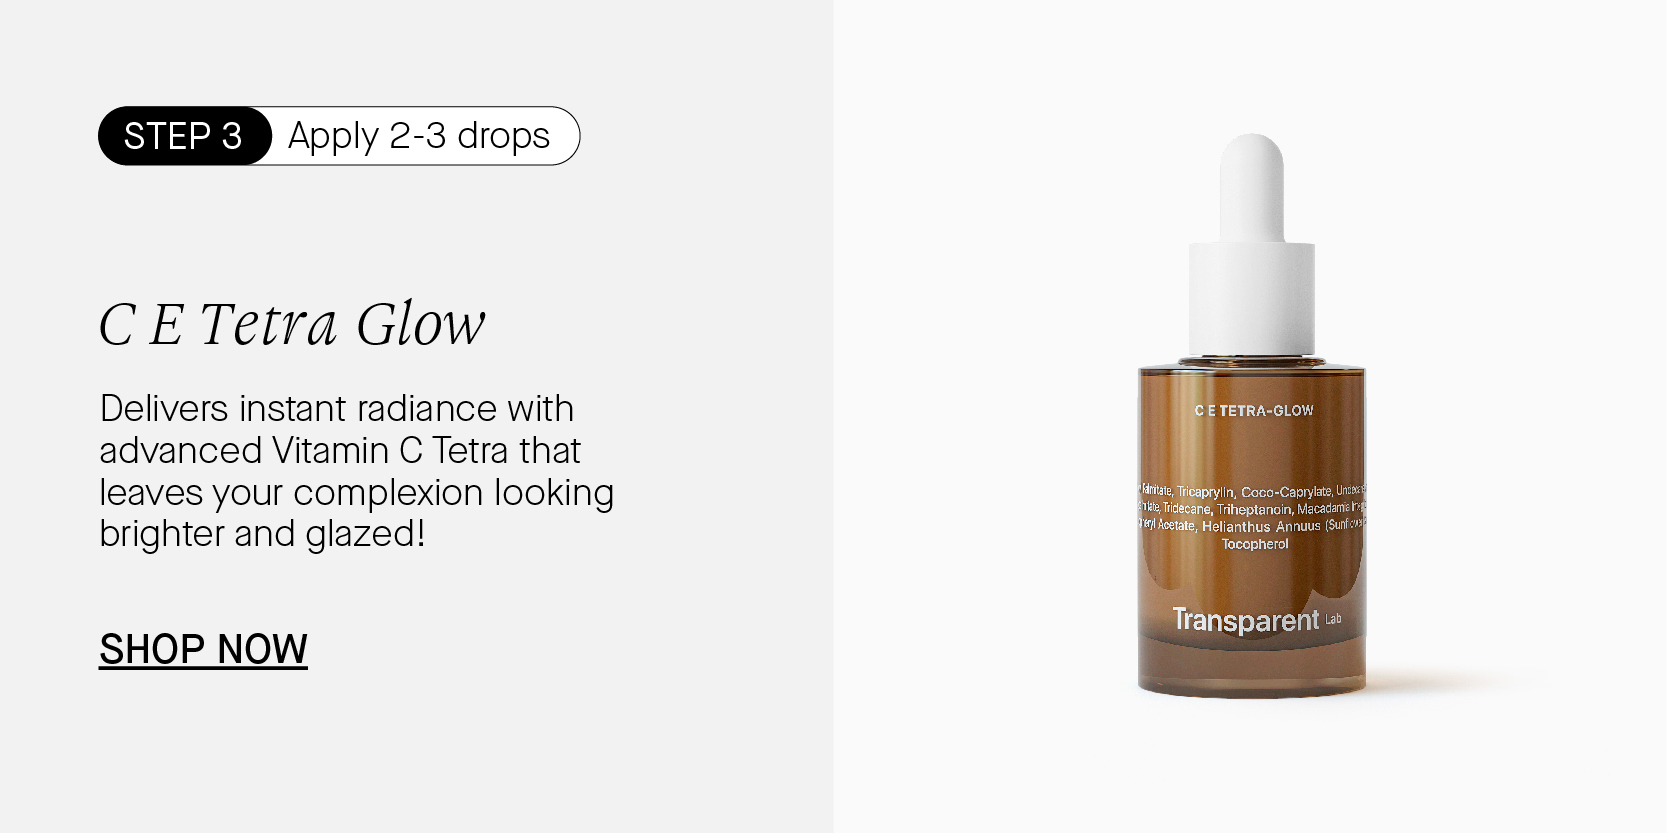 SINESRCHy Apply 2-3 drops CE Tetra Glow Delivers instant radiance with advanced Vitamin C Tetra that leaves your complexion looking brighter and glazed! SHOP NOW e Transparent 